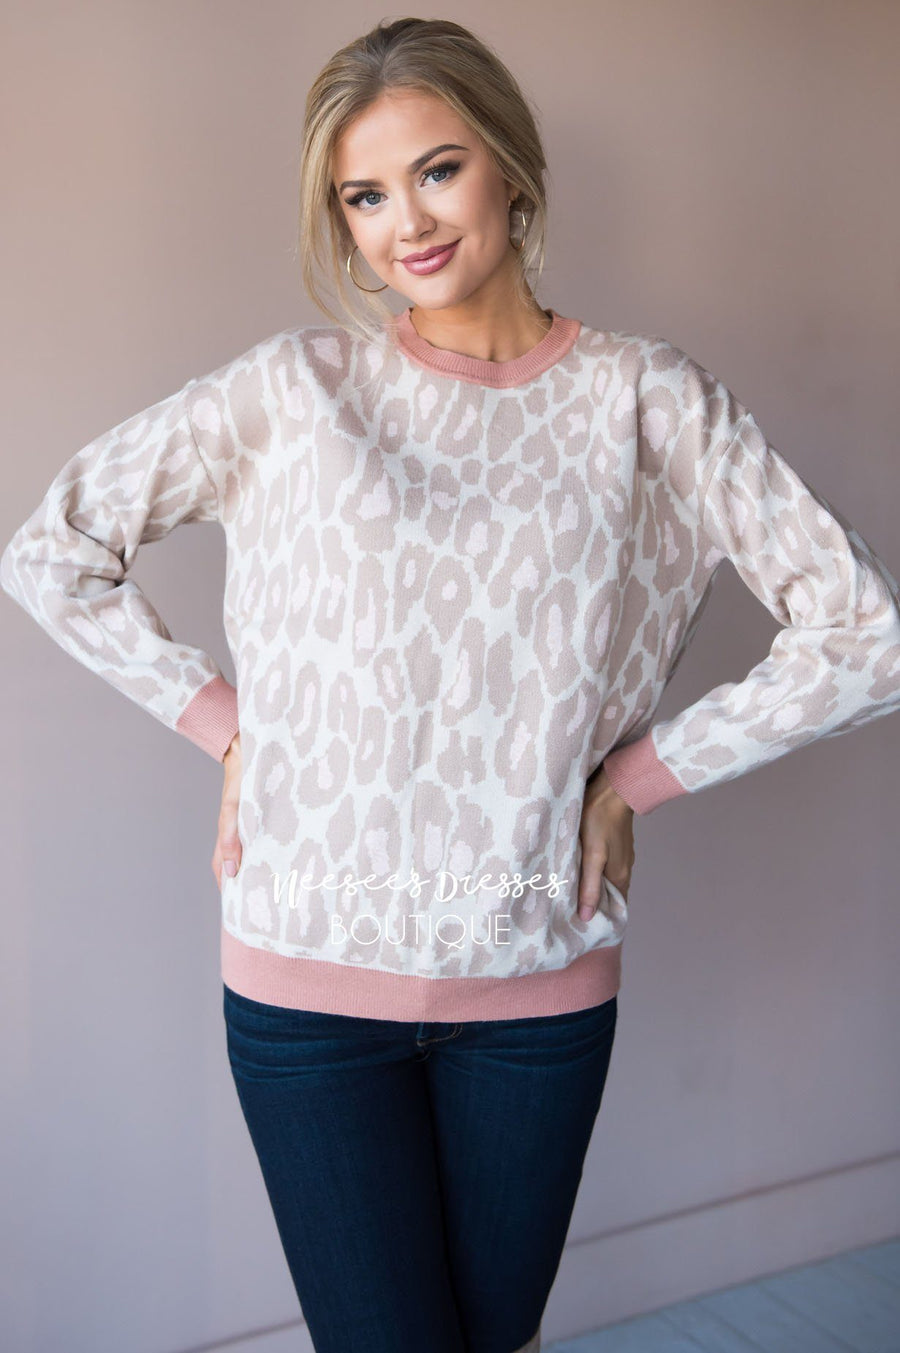 Stand By Me animal print sweater Tops vendor-unknown 